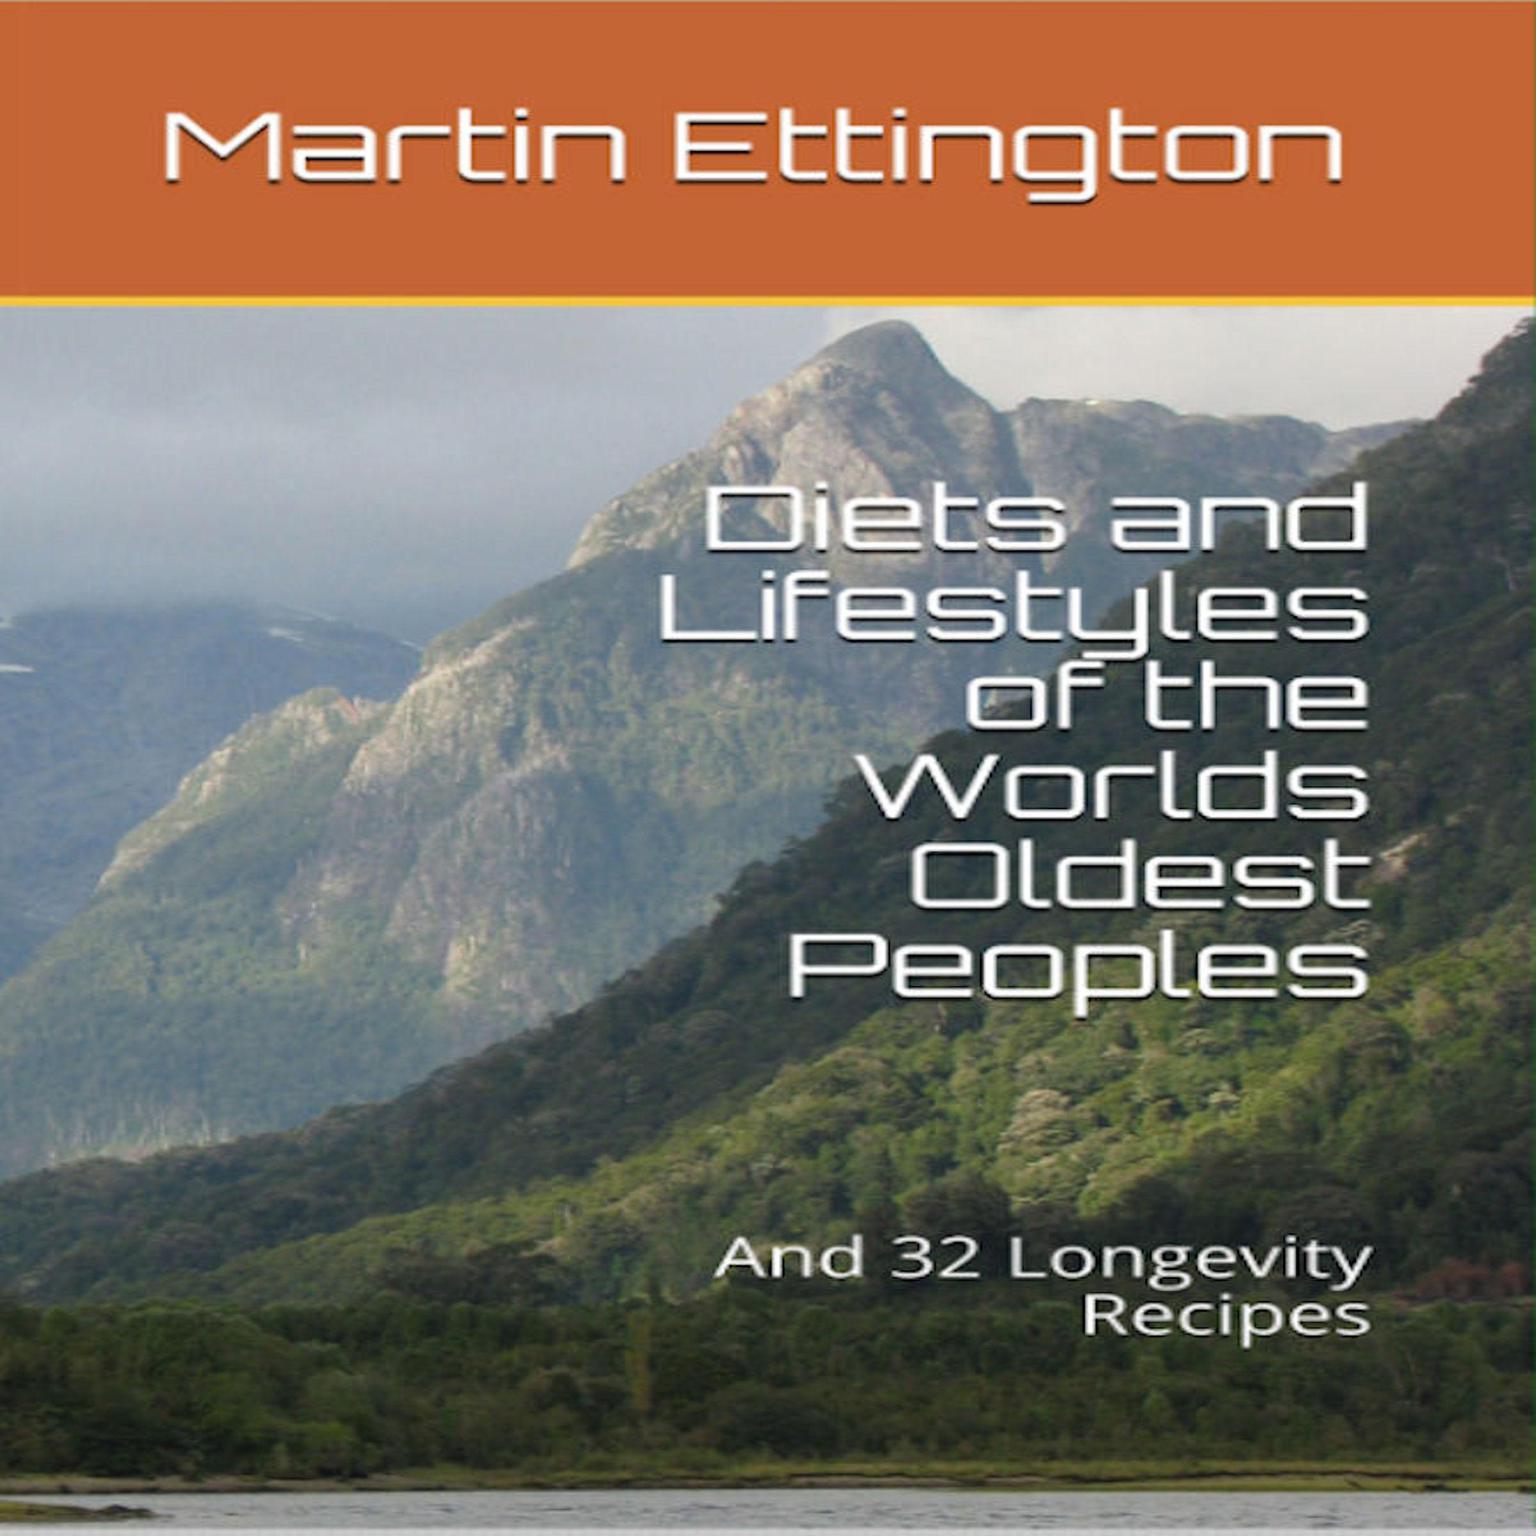 Diets and Lifestyles of the Worlds Oldest Peoples & 32 Longevity Recipes Audiobook, by Martin K. Ettington